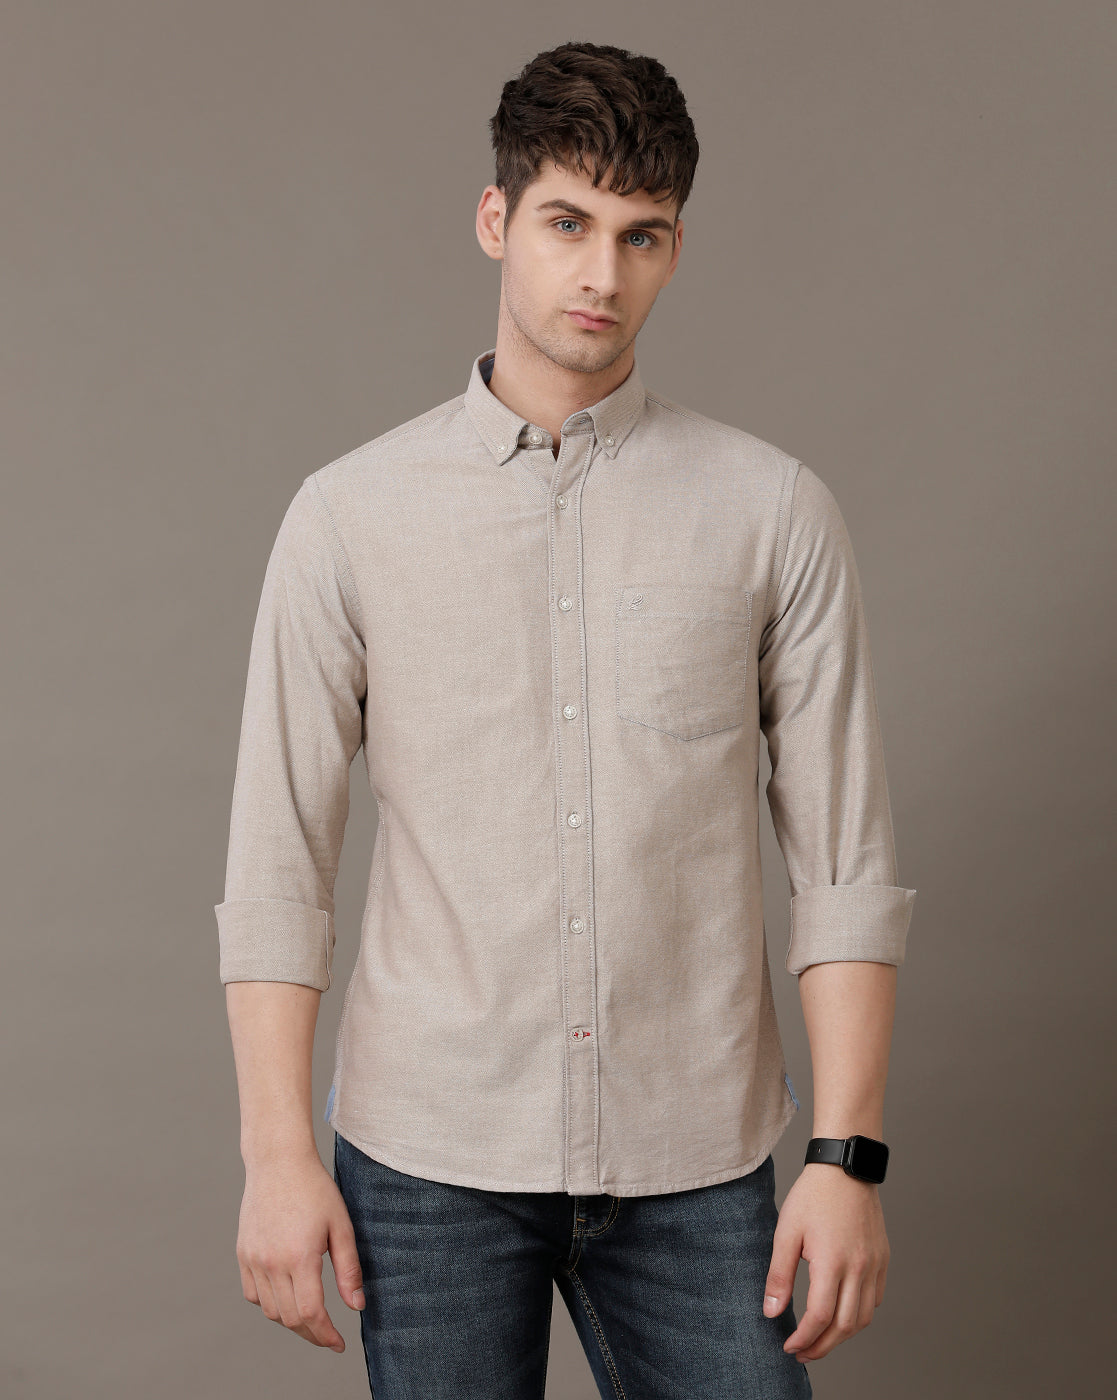 Double Two Men's Classic solid Oxford Button Down Shirt